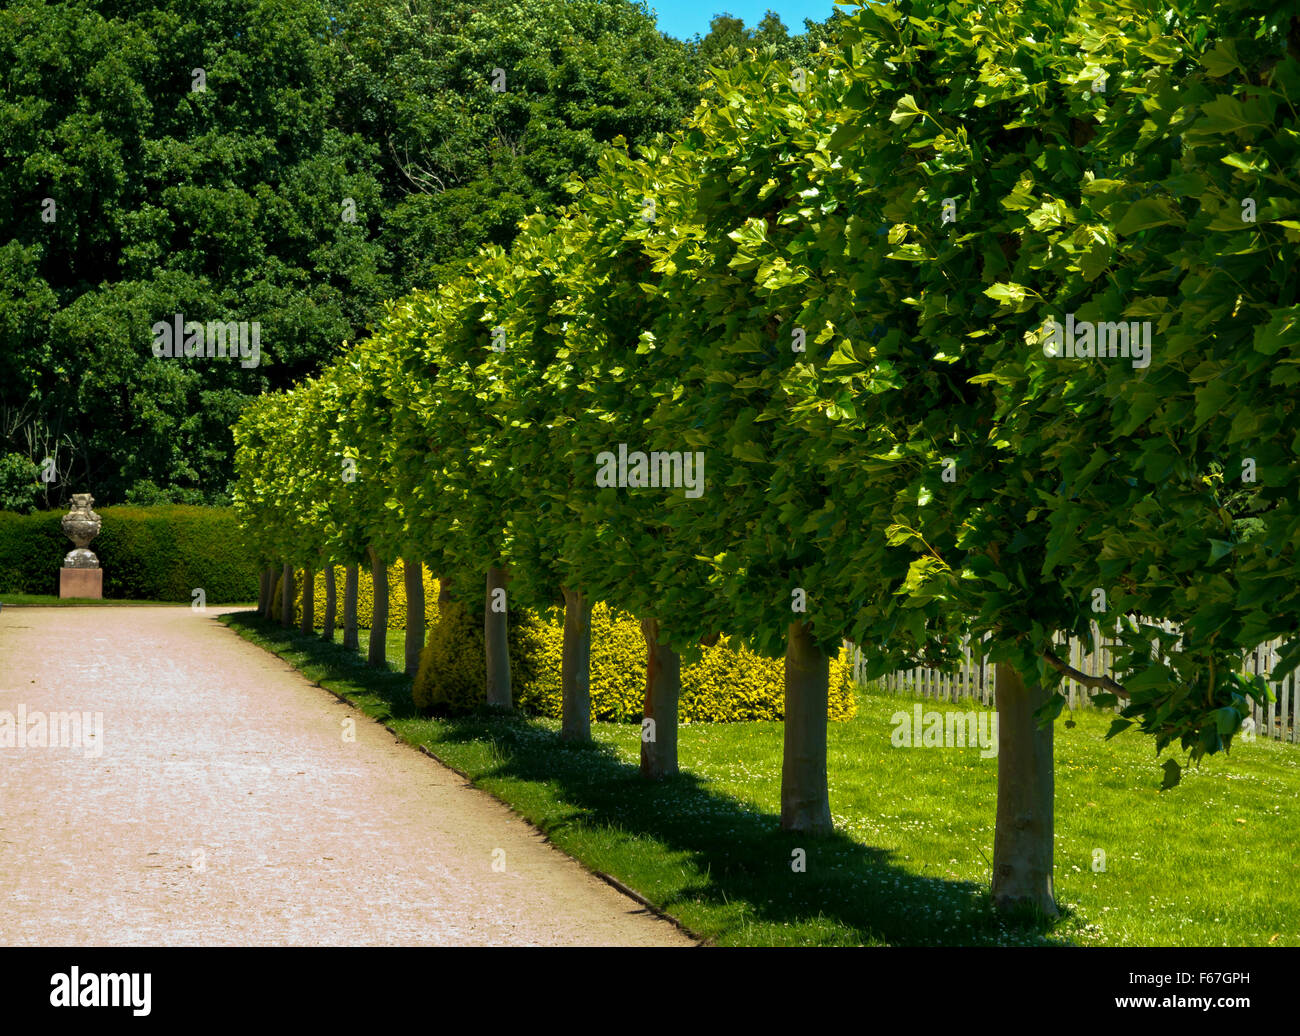 Avenue of trees in garden at Rufford Abbey near Ollerton in Nottinghamshire England UK in the grounds of Rufford Country Park Stock Photo